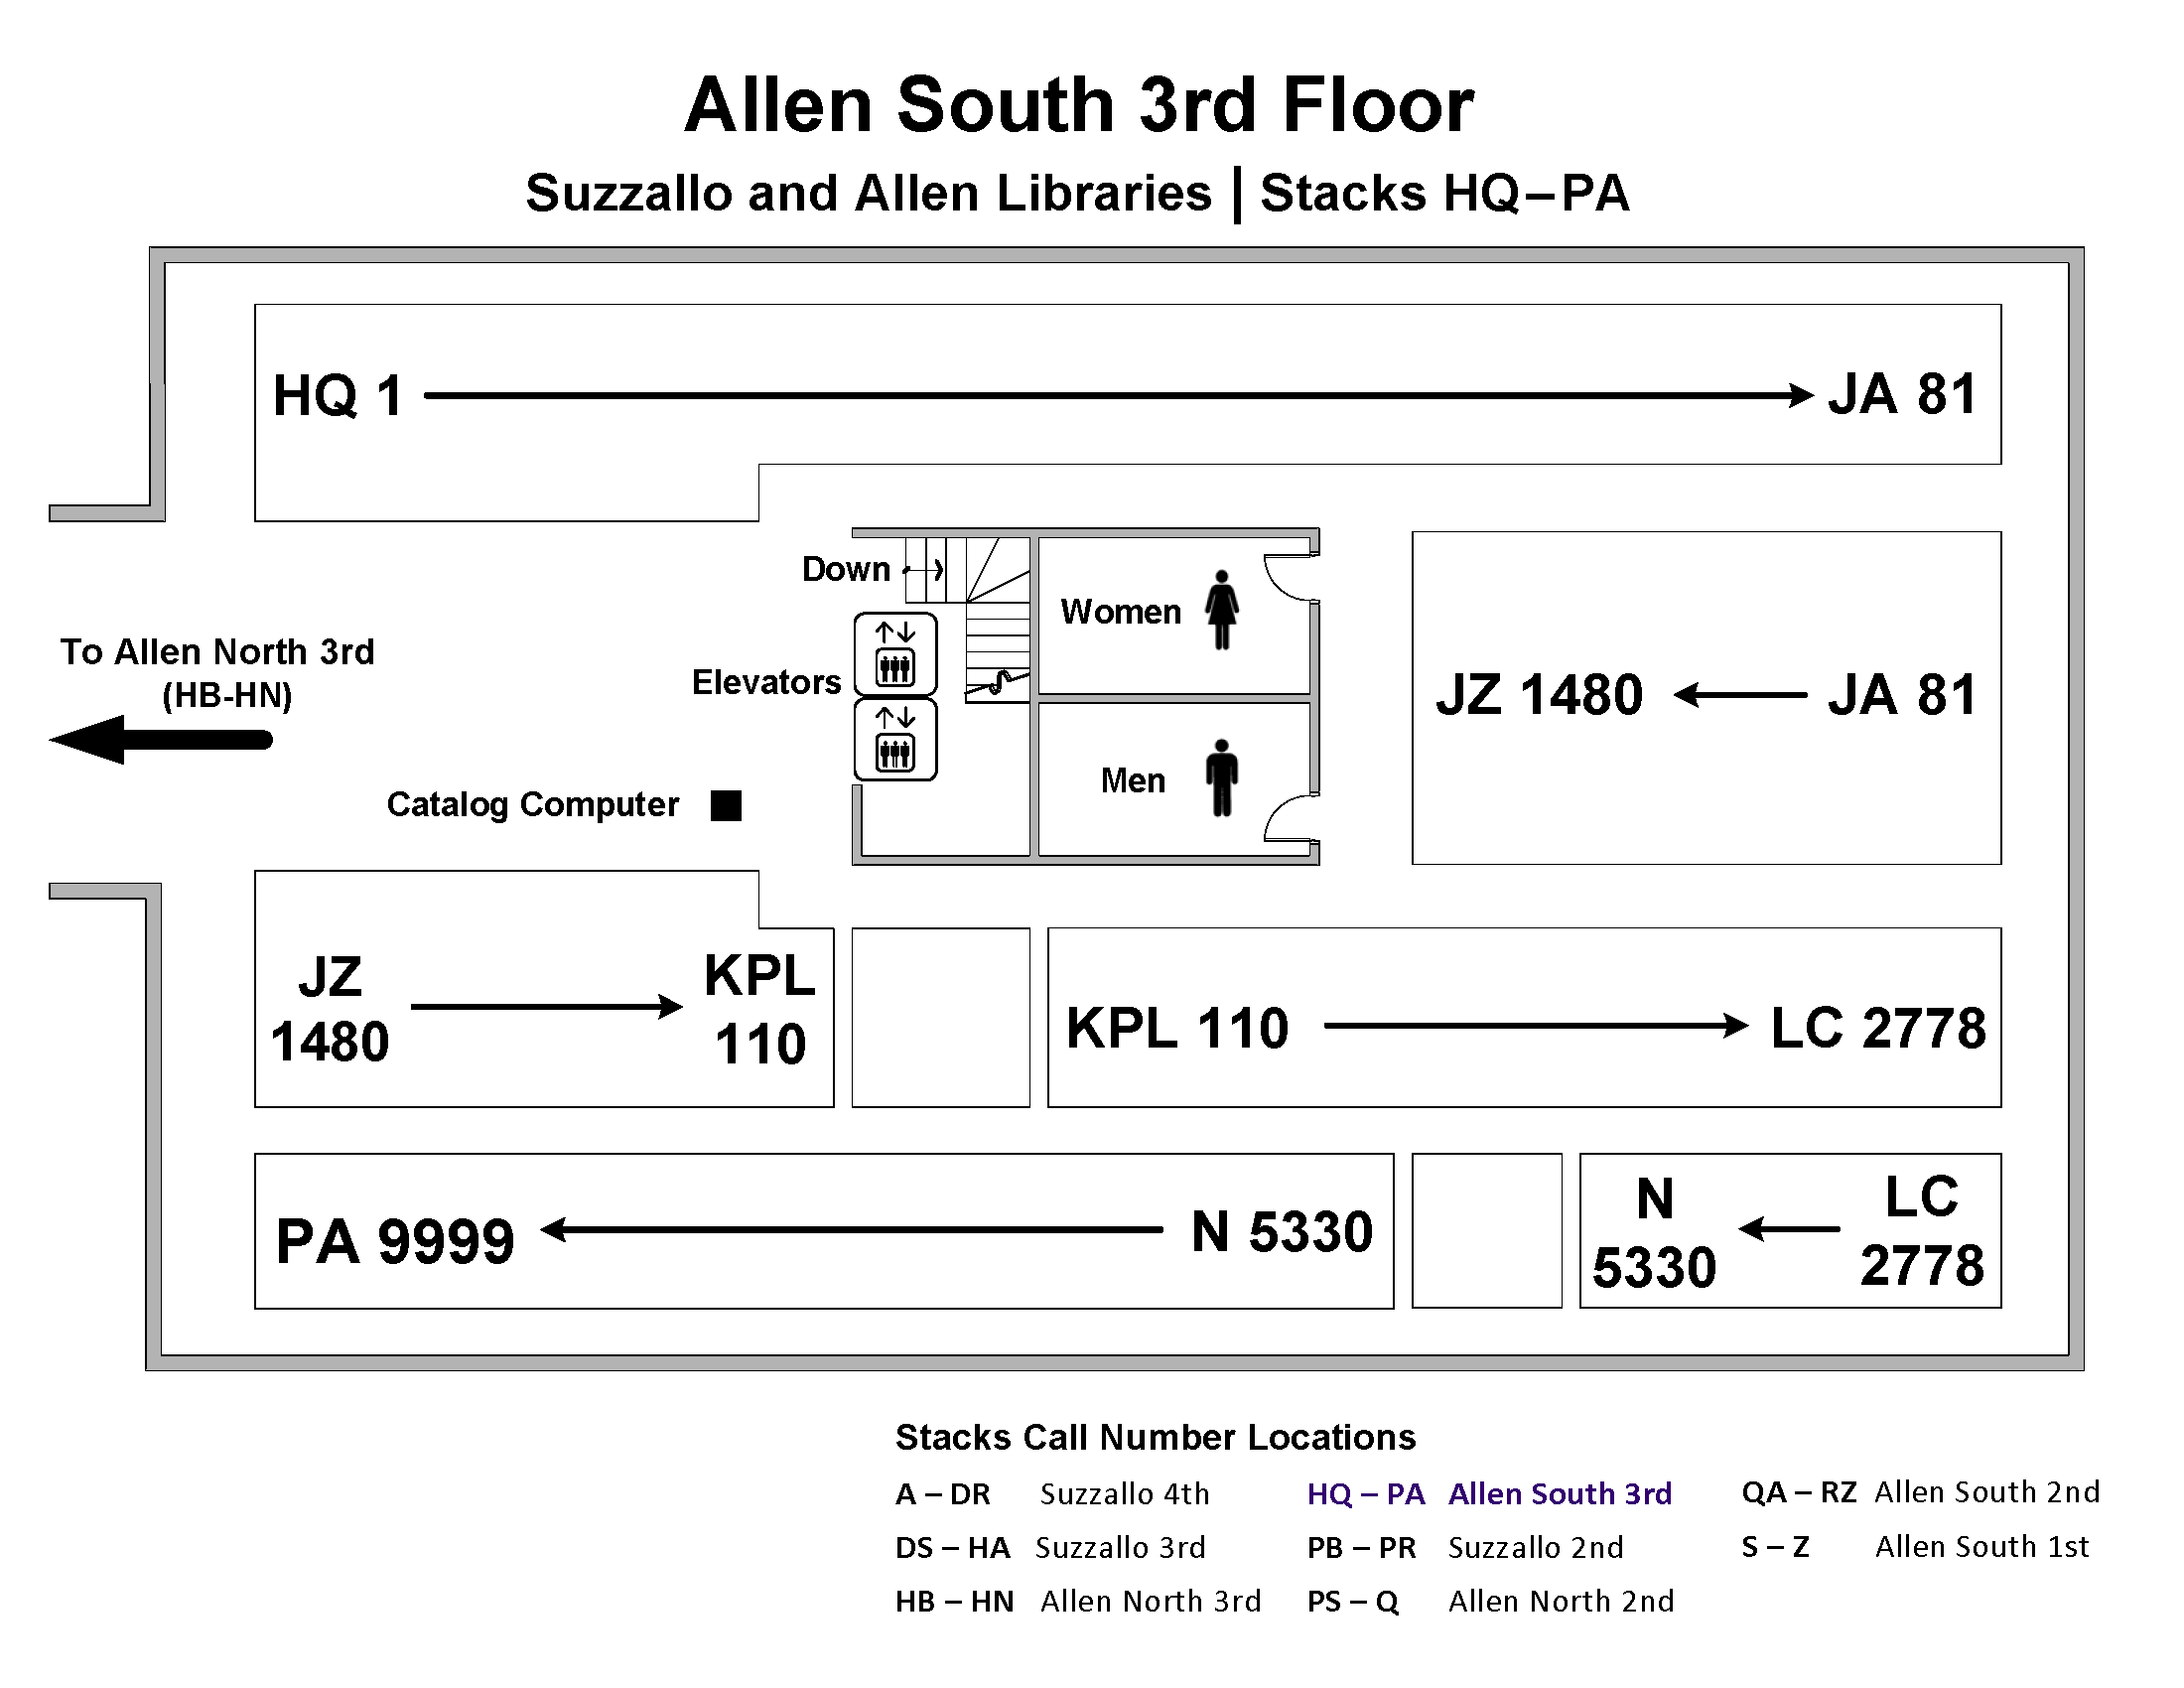 Call Number Map - Allen S 3rd